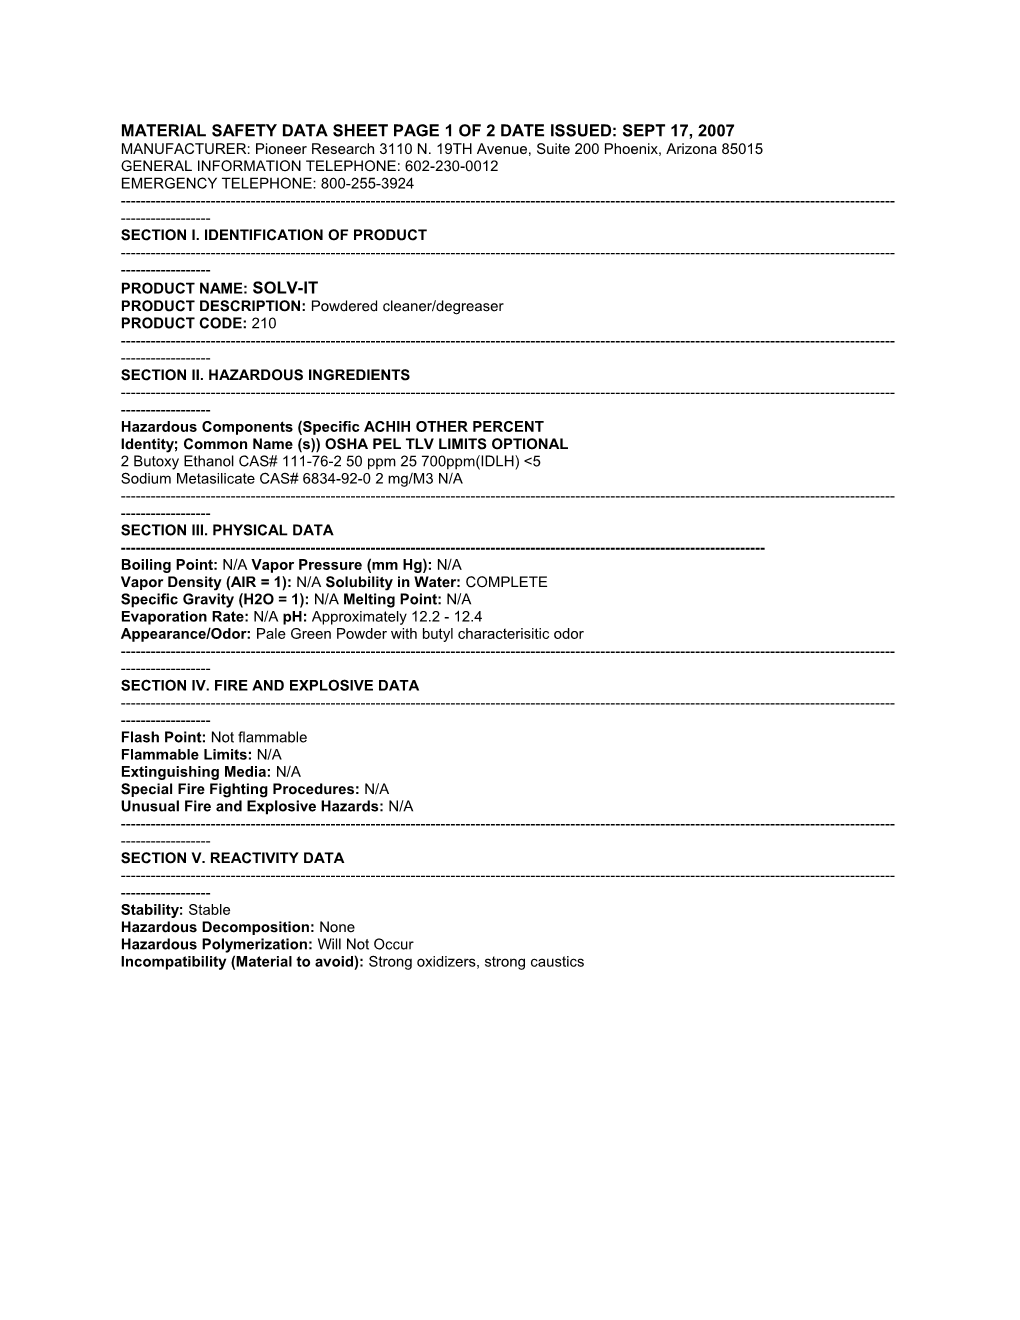 Material Safety Data Sheet Page 1 of 2 Date Issued: Sept 17, 2007